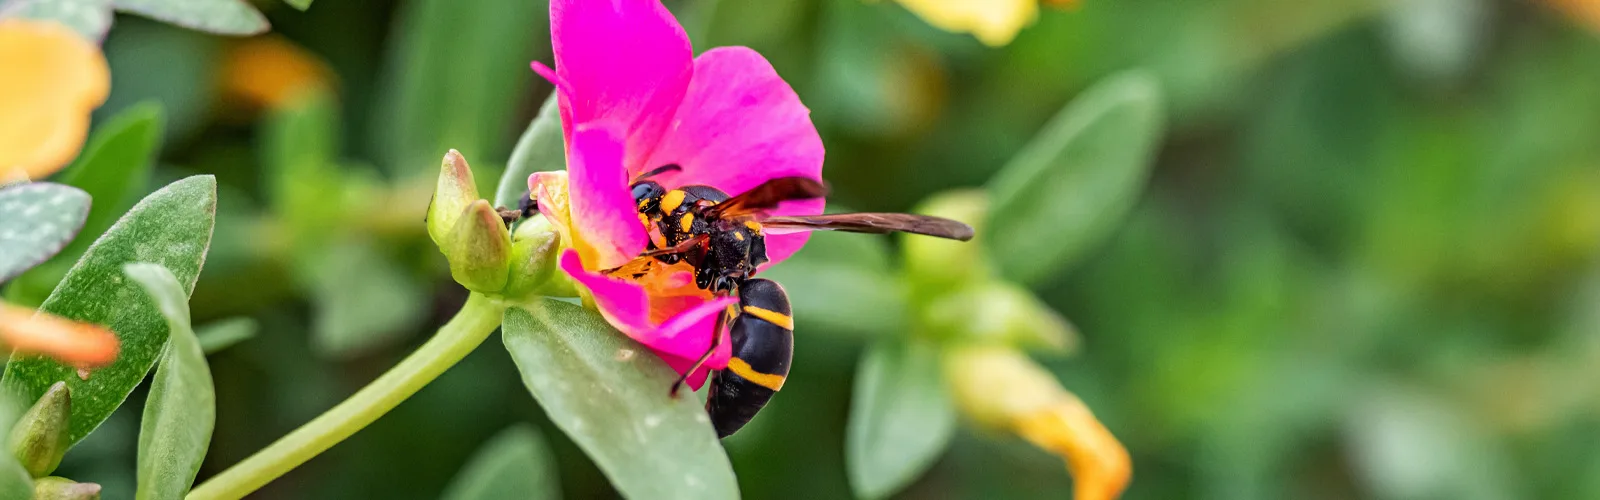 A wasp on a flower